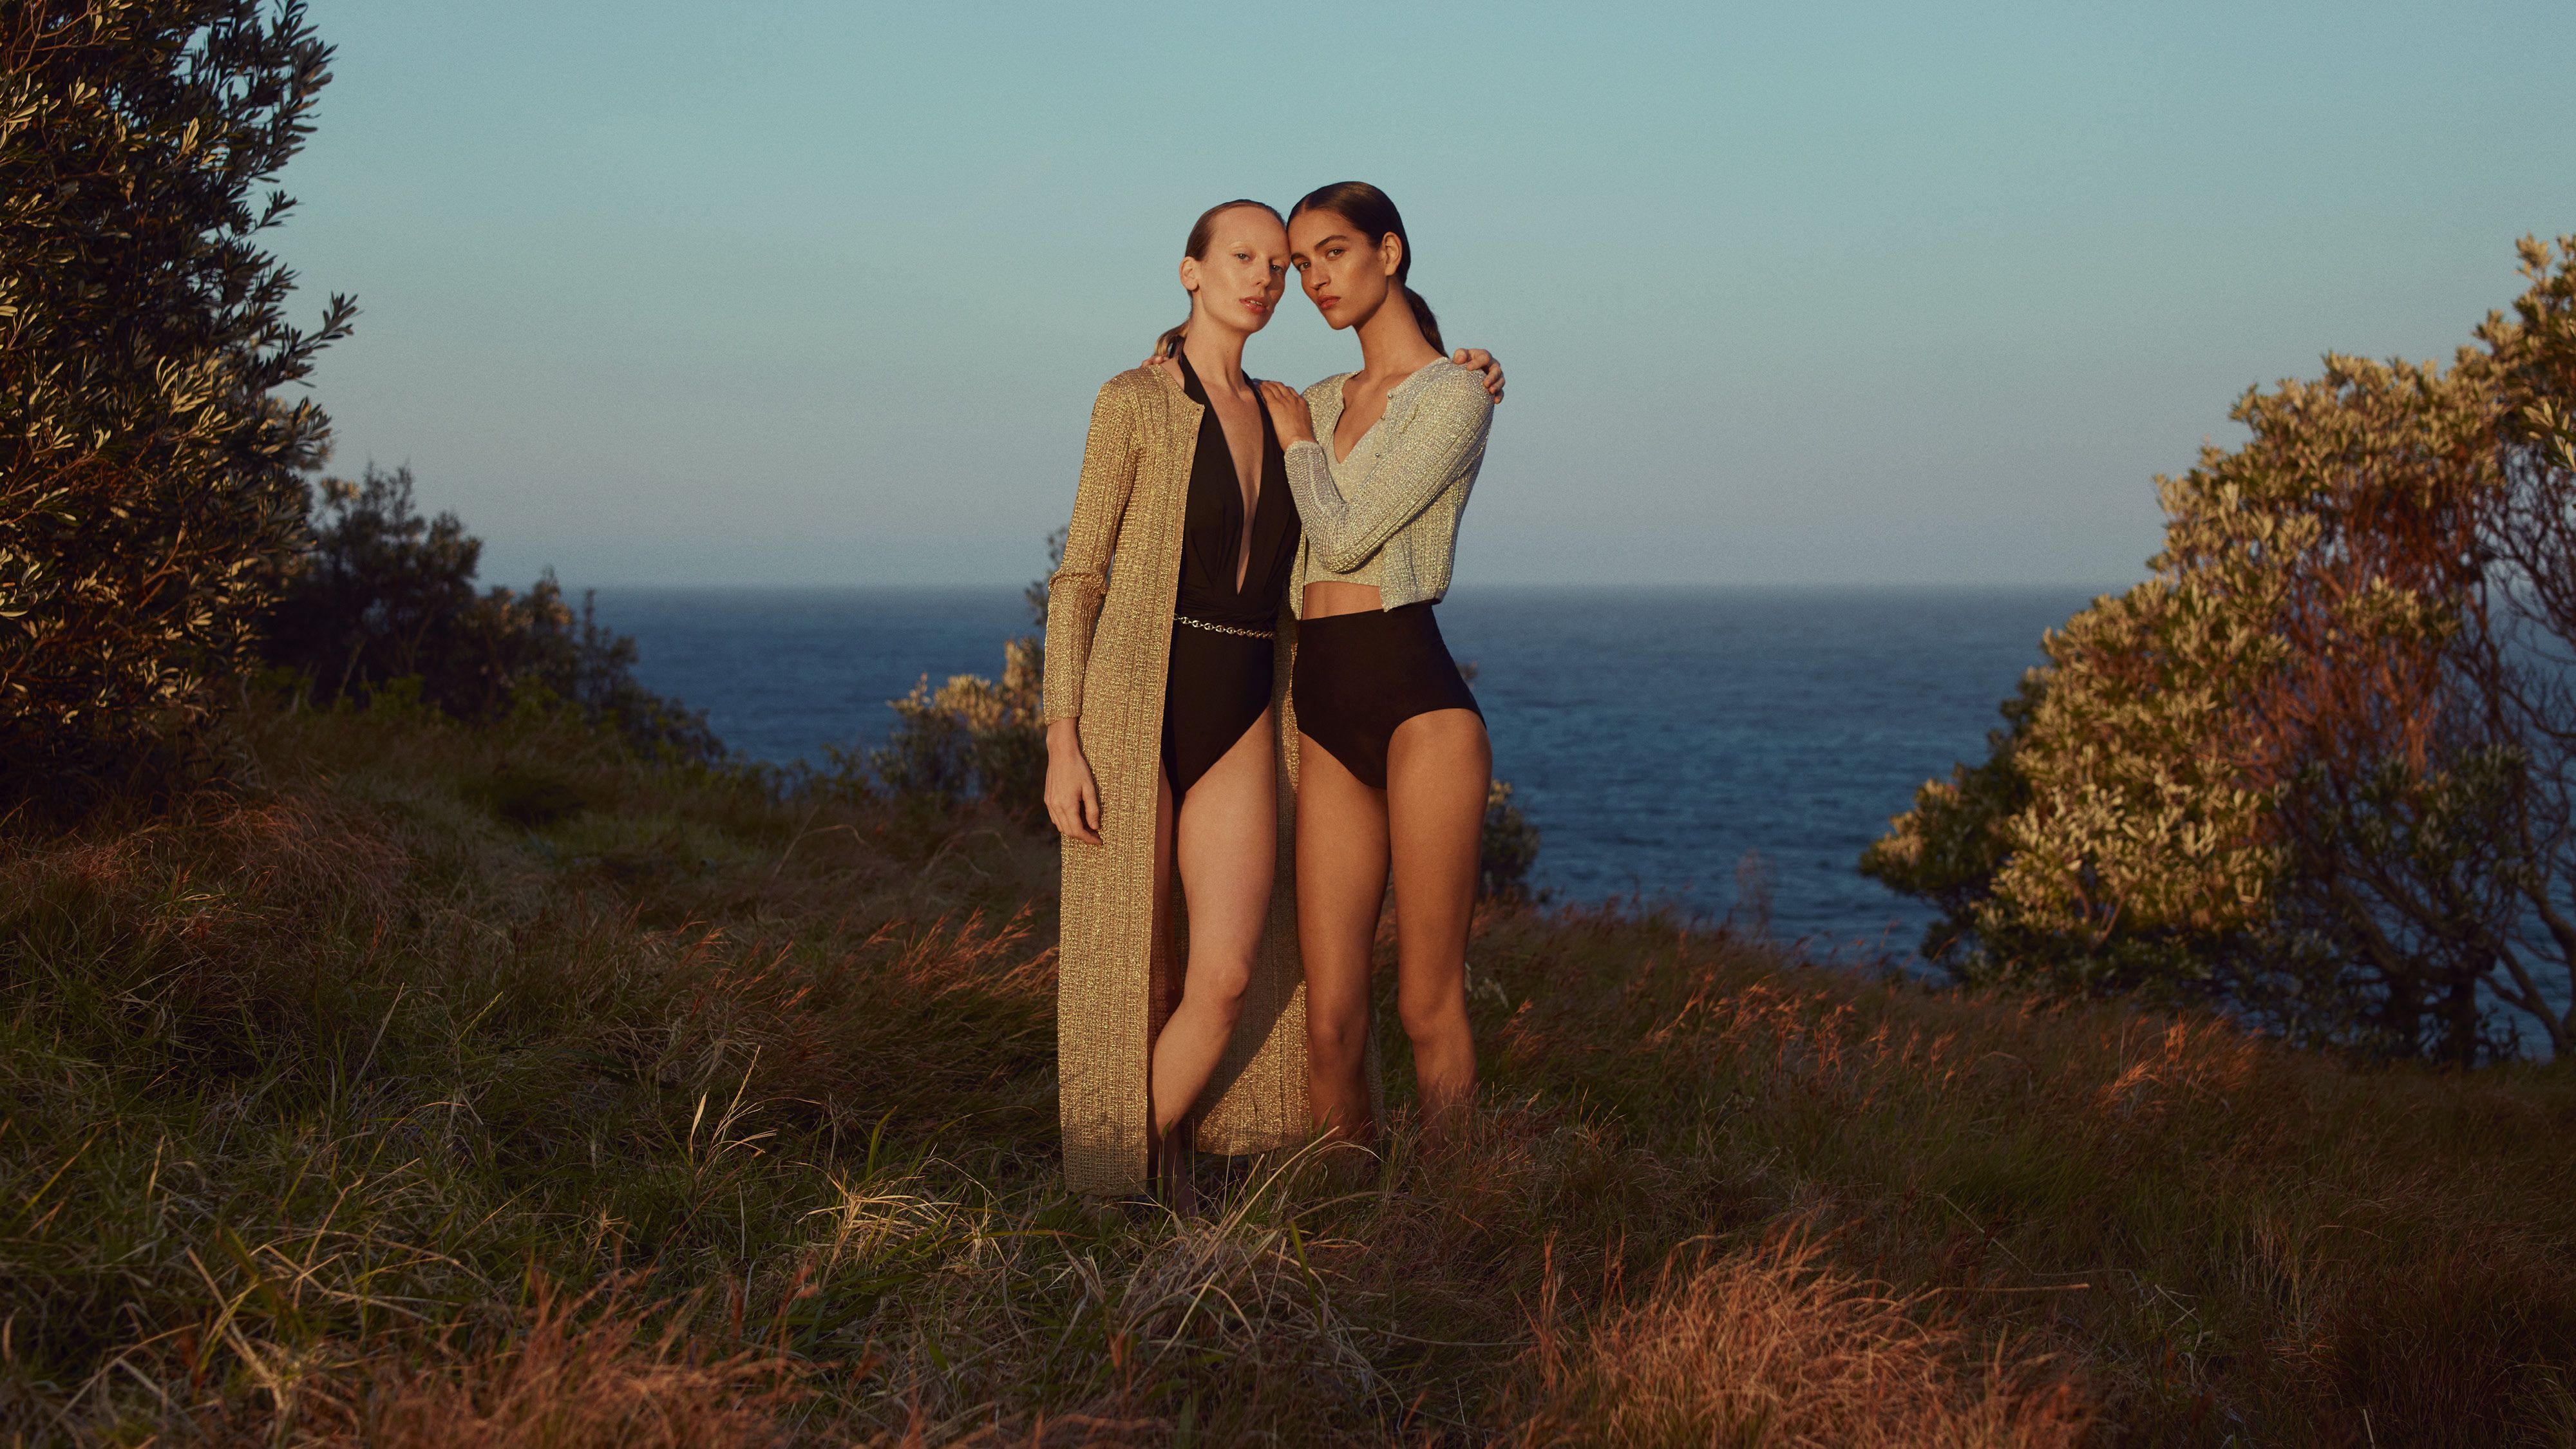 Two models standing on grass with the ocean in the background embracing wearing metallic knit cardigans and black swimwear